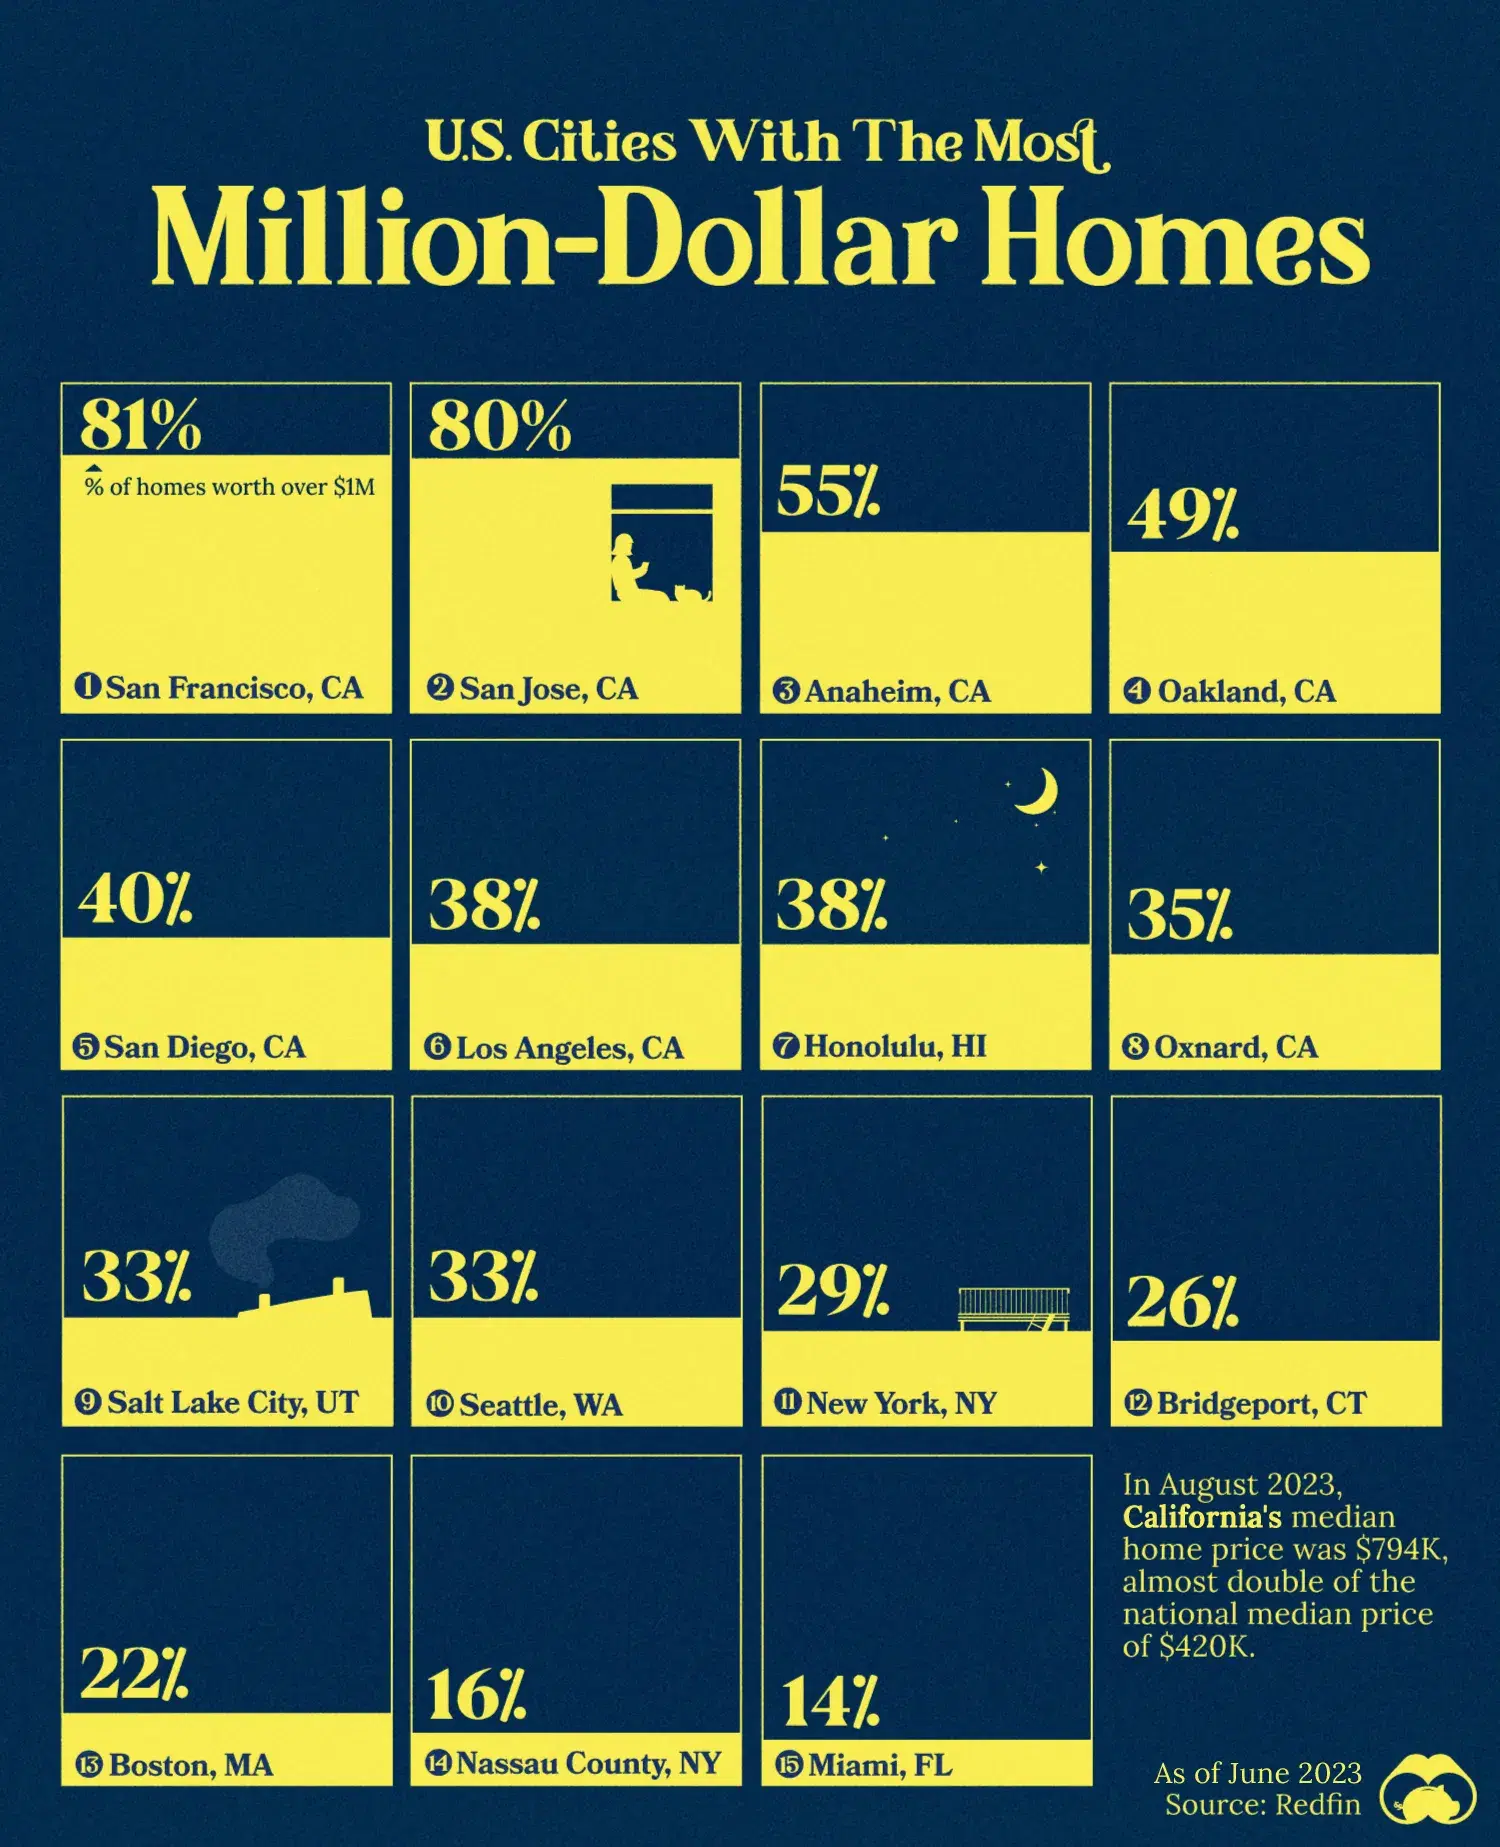 Ranking U.S. Cities by Their % Of Million-Dollar Homes